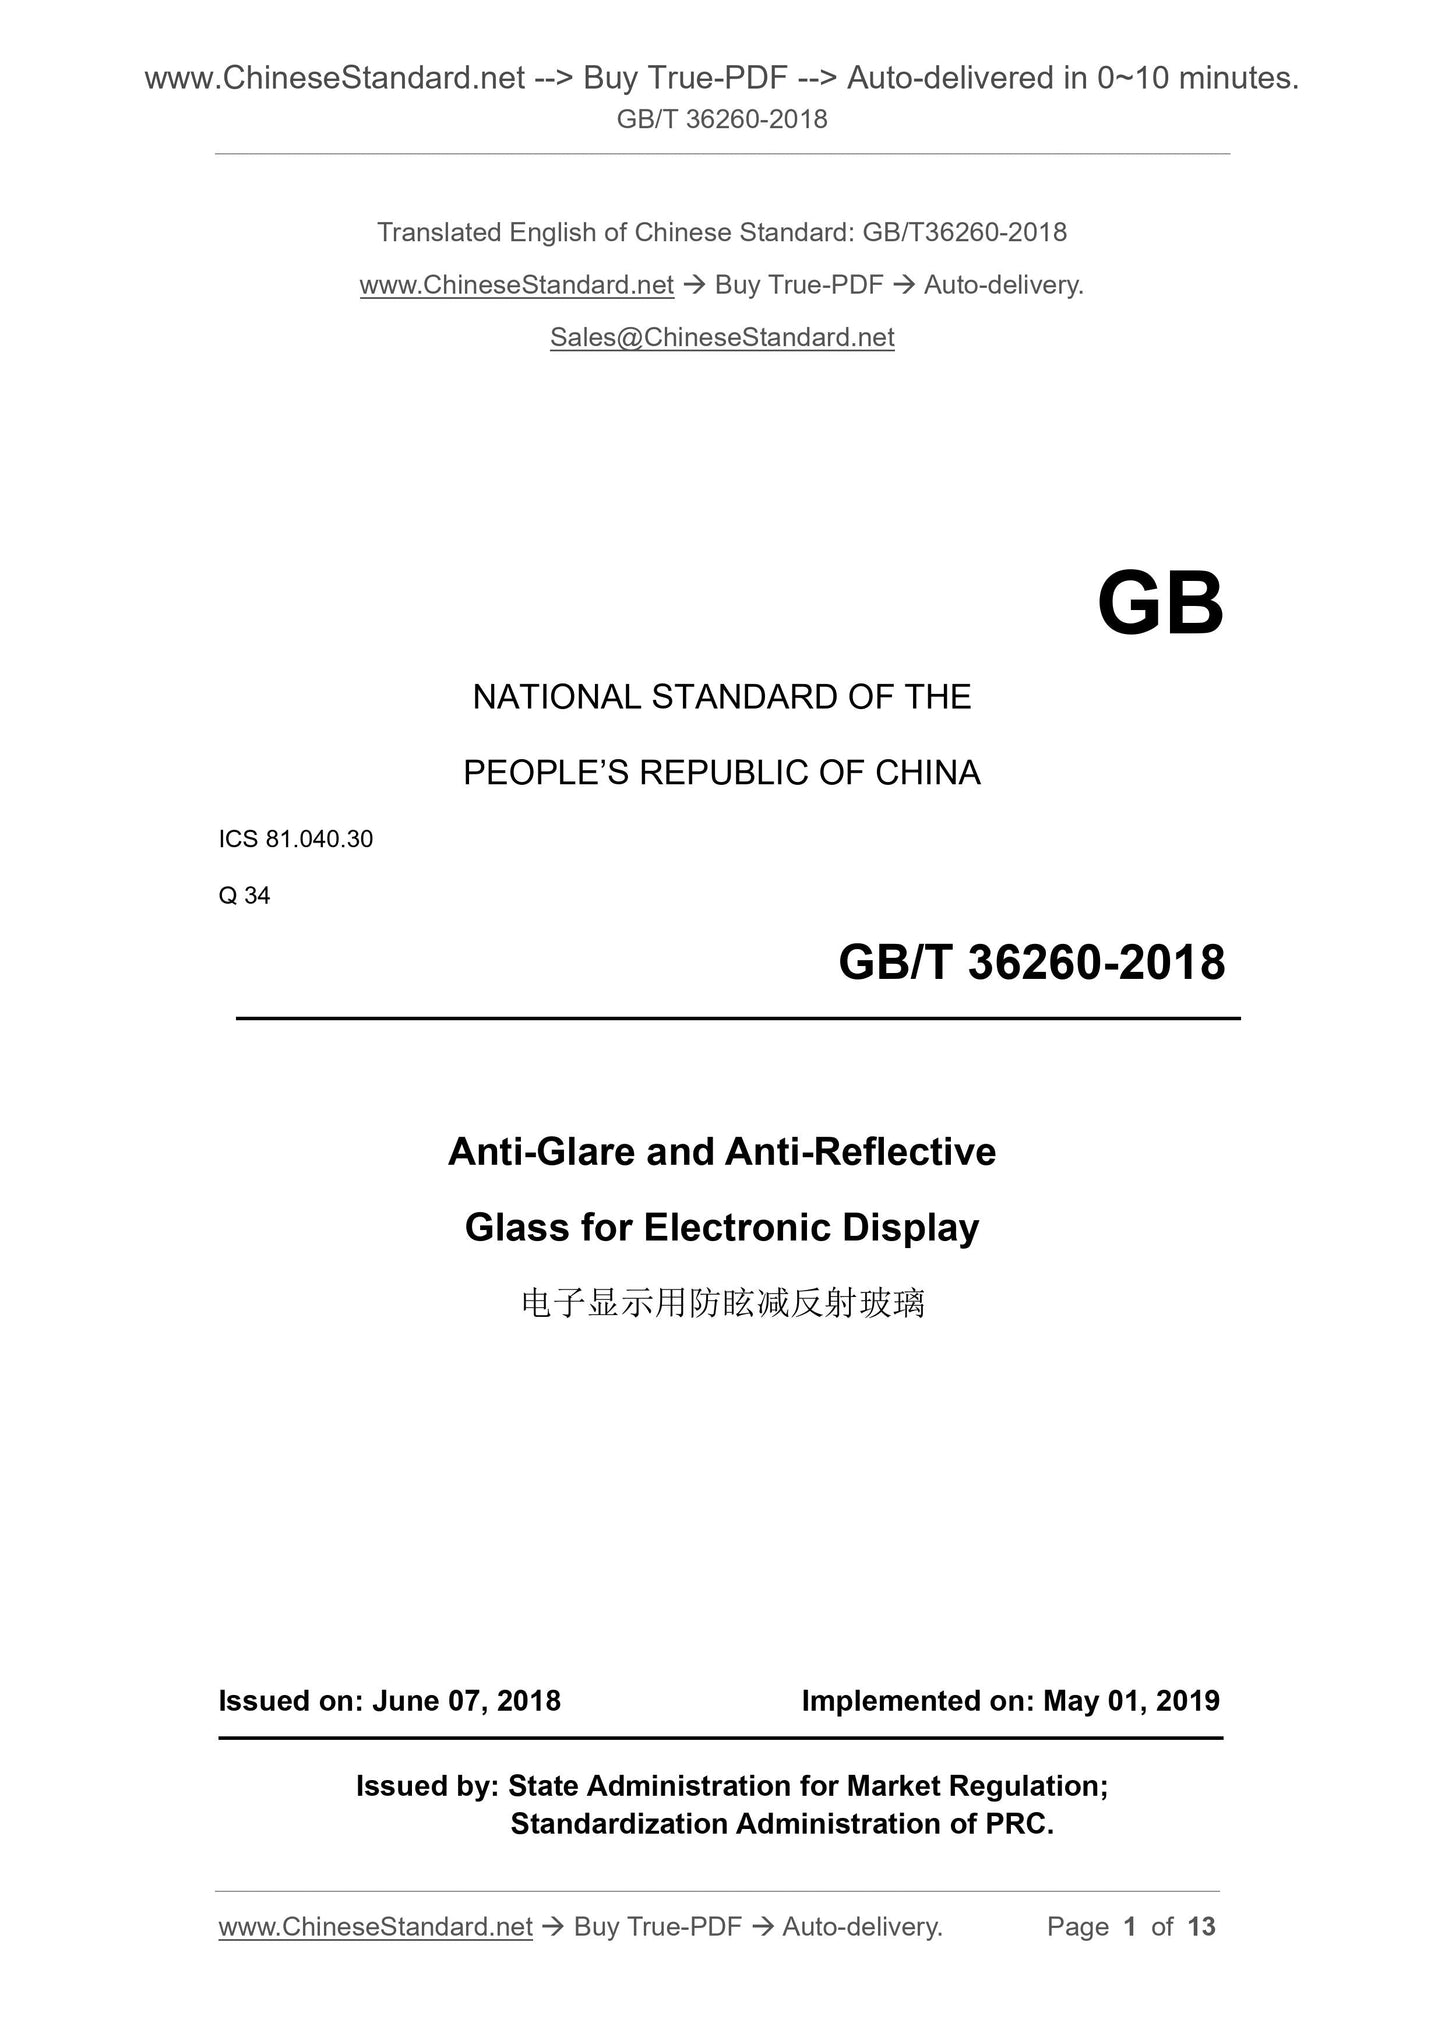 GB/T 36260-2018 Page 1